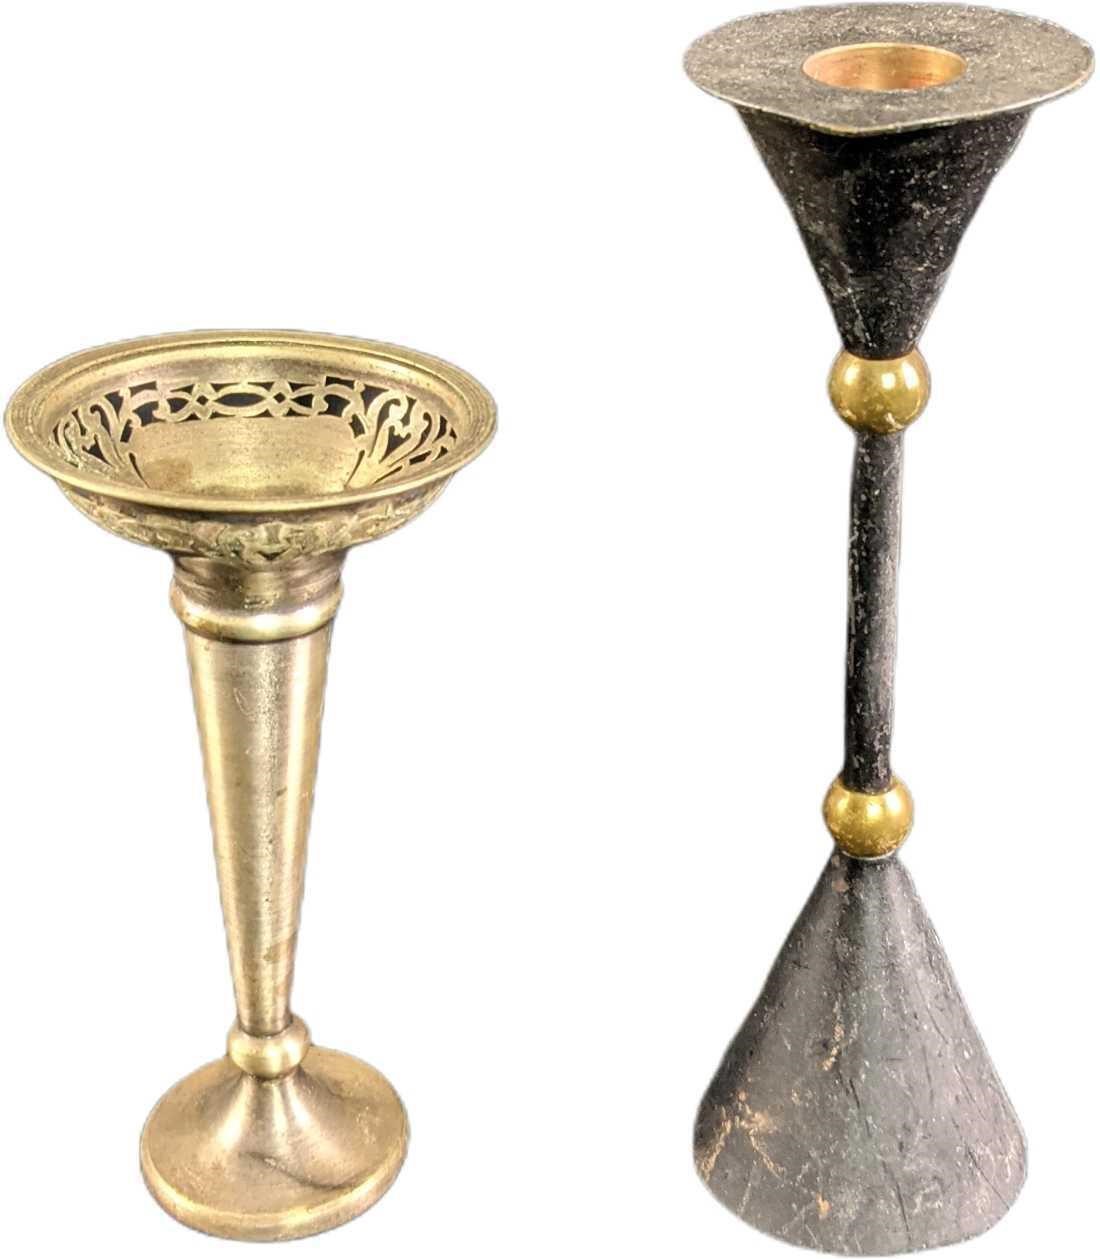 Vintage Brass & Silver Plated Candlestick Holders